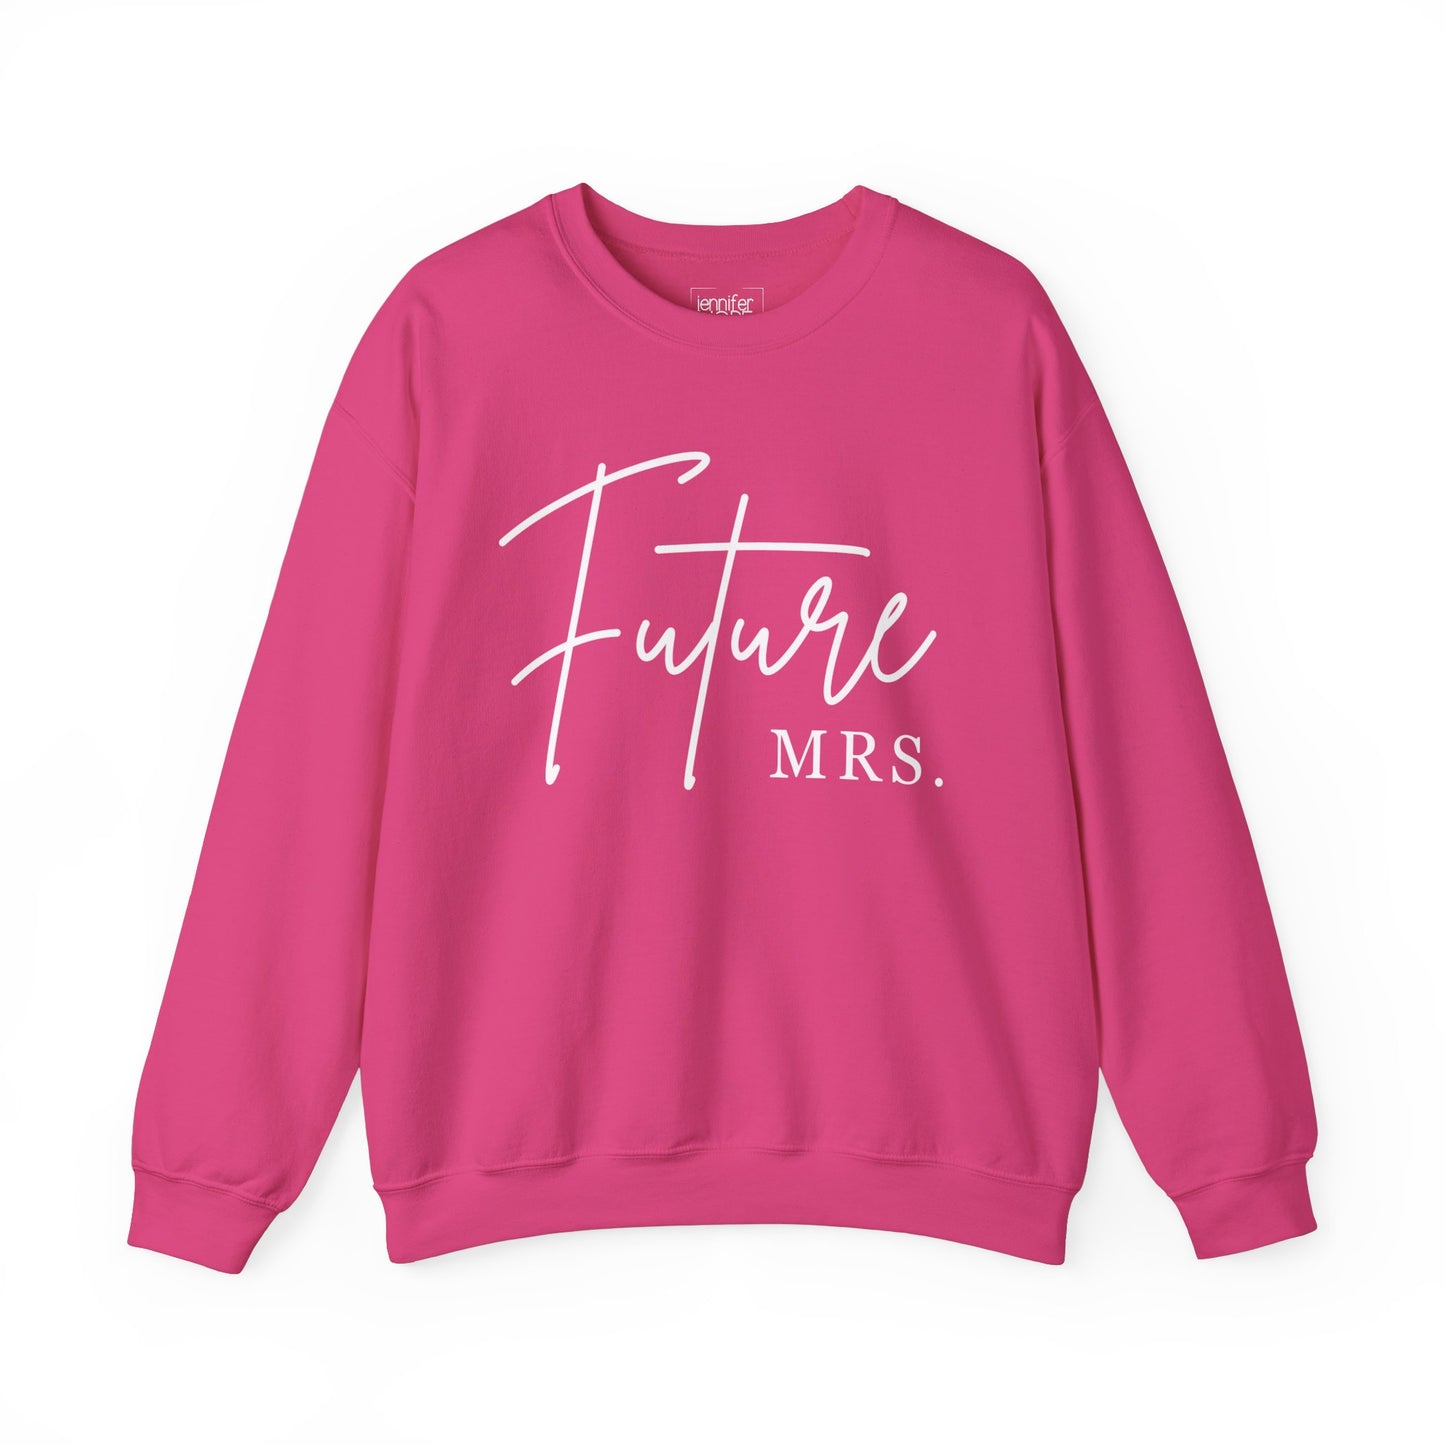 Future Mrs. Crewneck Customizable Bridal Sweatshirt Personalize it with your new Last name on the back.